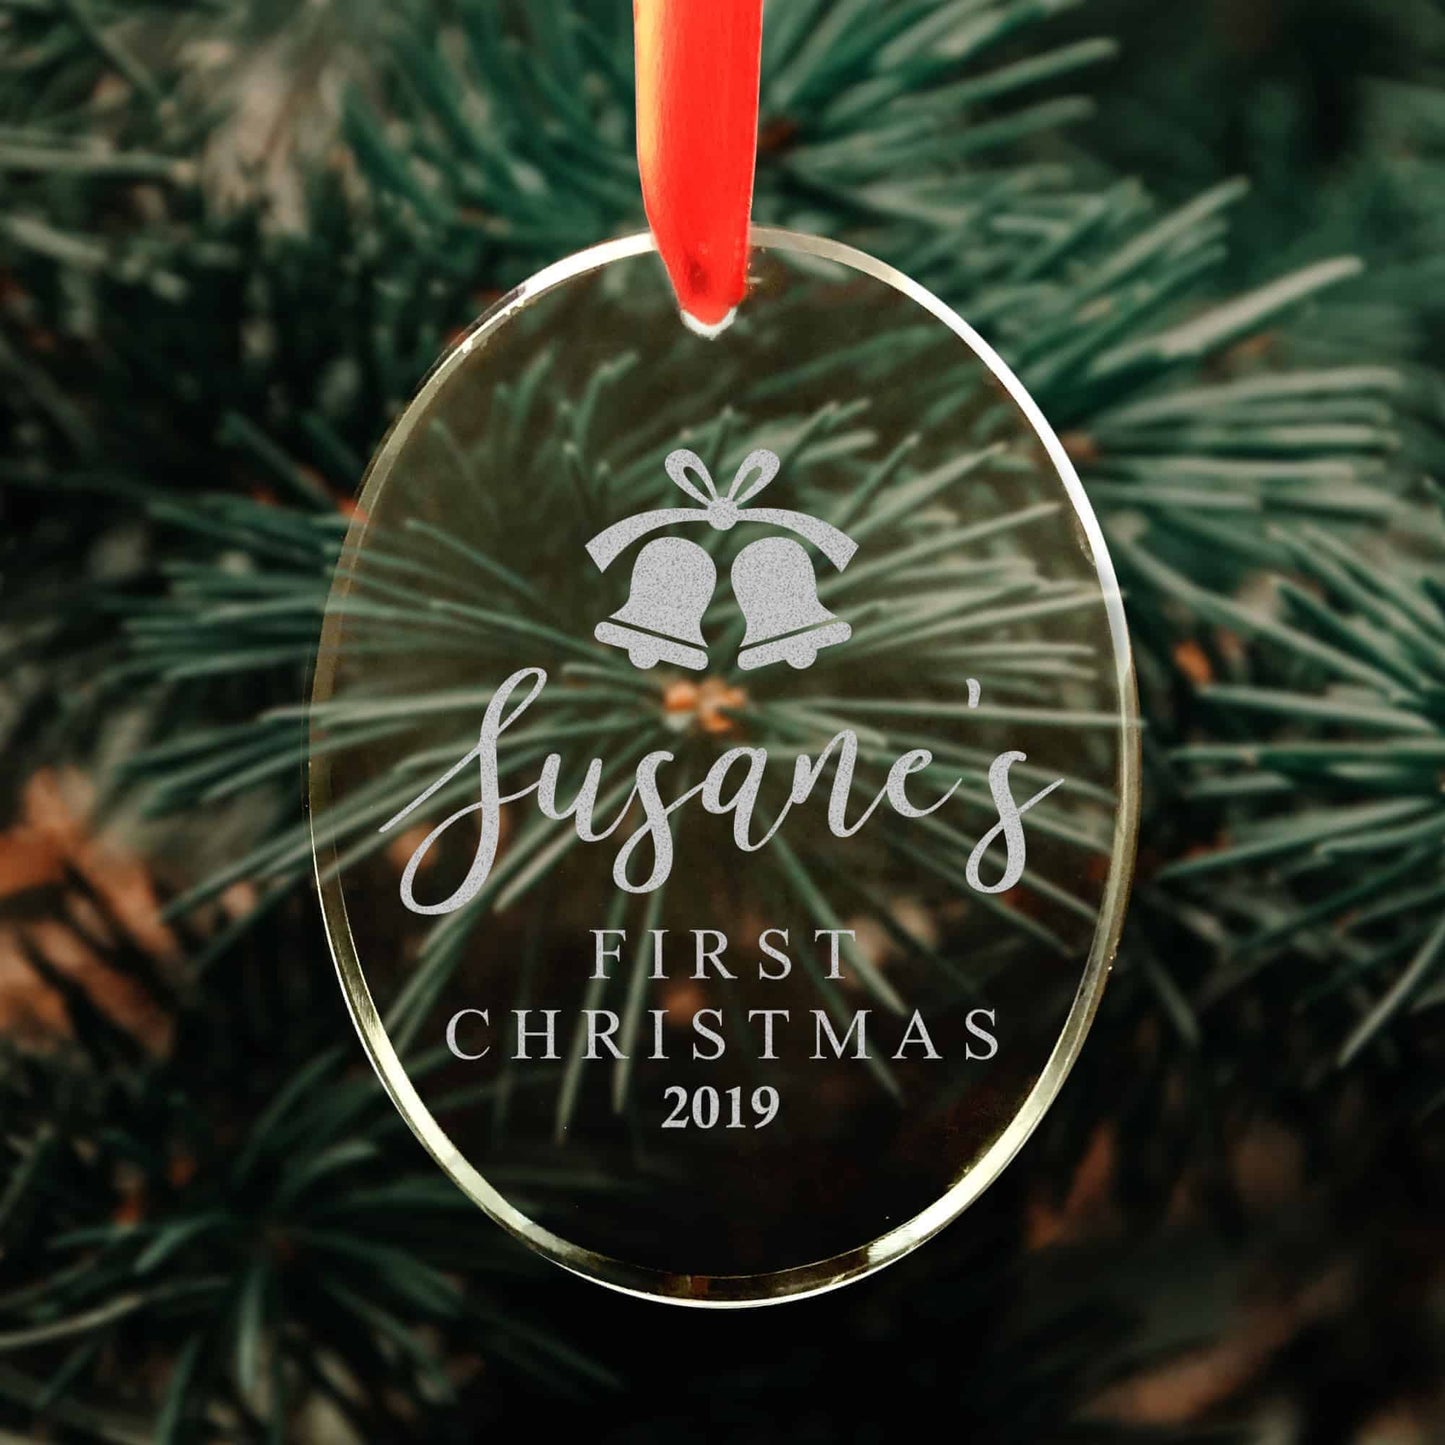 Crystal Glass Oval Babys First Christmas Ornament Gift